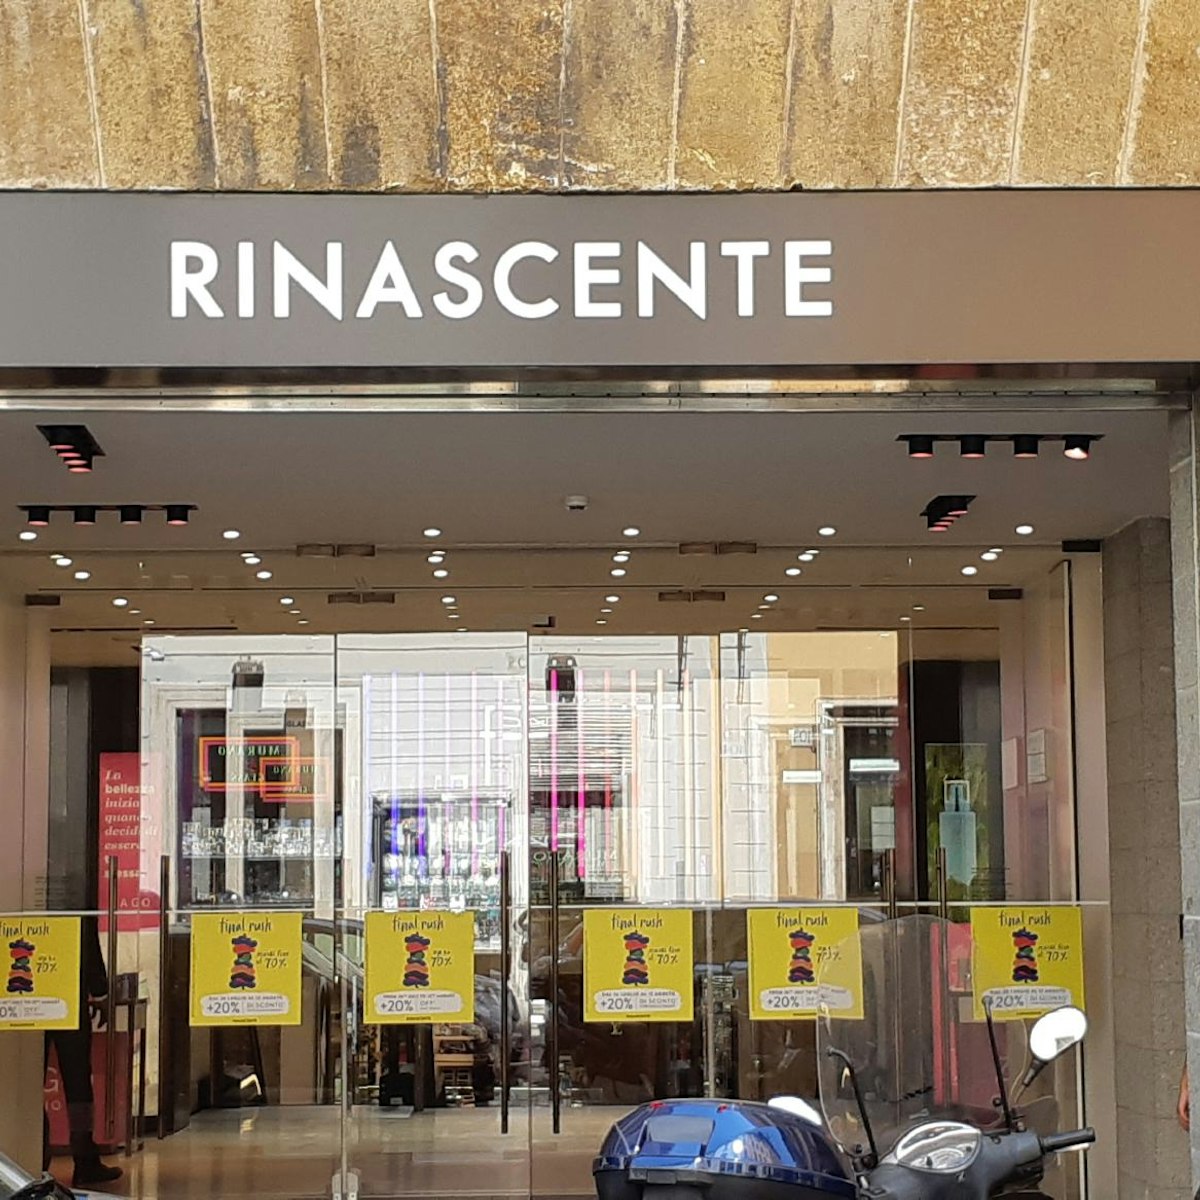 The entrance of department store La Rinascente, which houses Up Sunset Bar on its top floor.